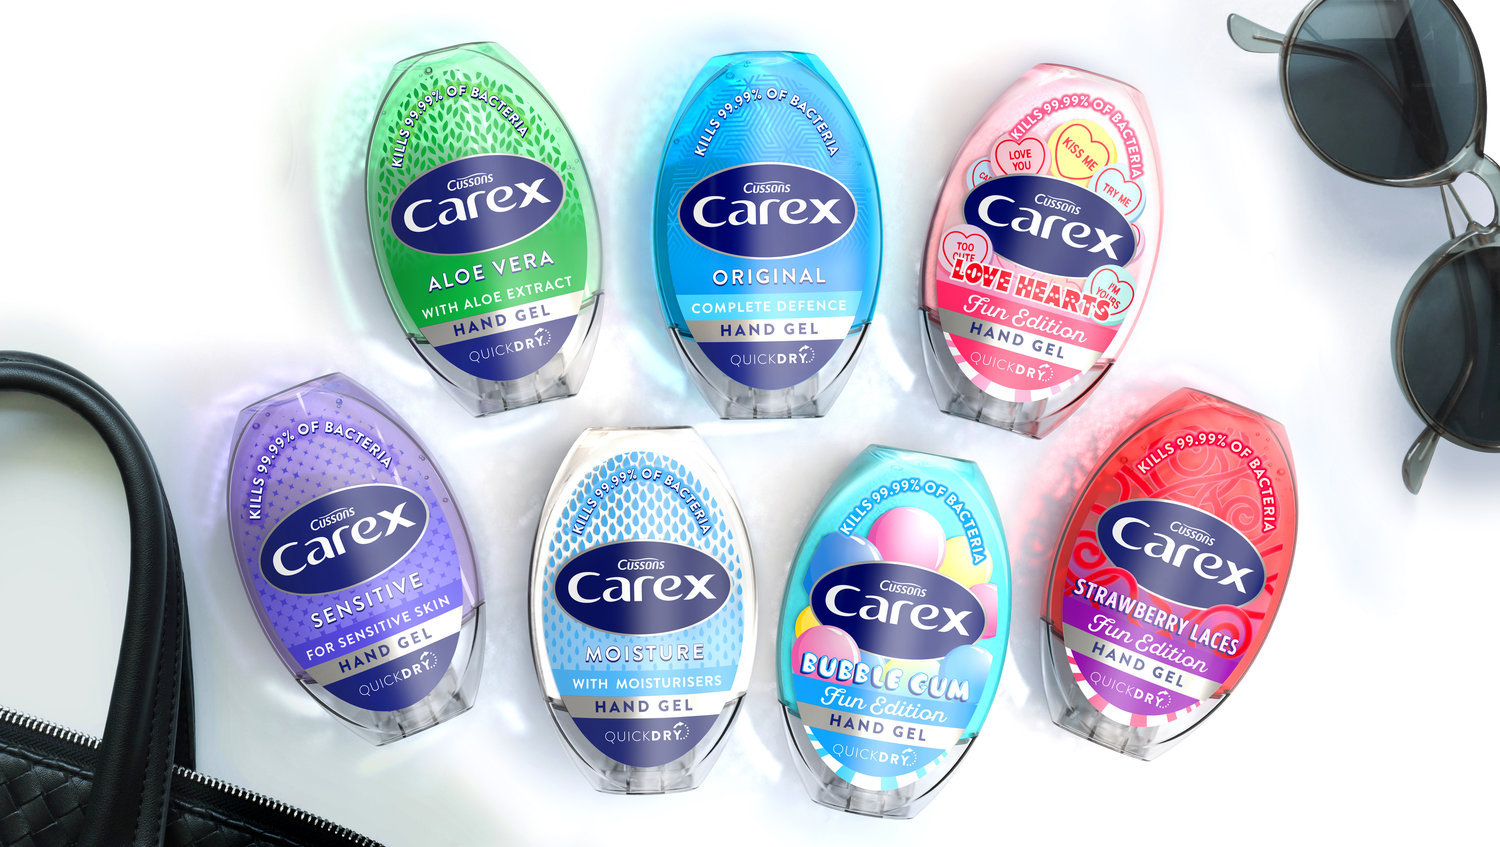 Carex Relaunches Its Antibacterial Hand-gel Range With an Iconic Design by Pb Creative